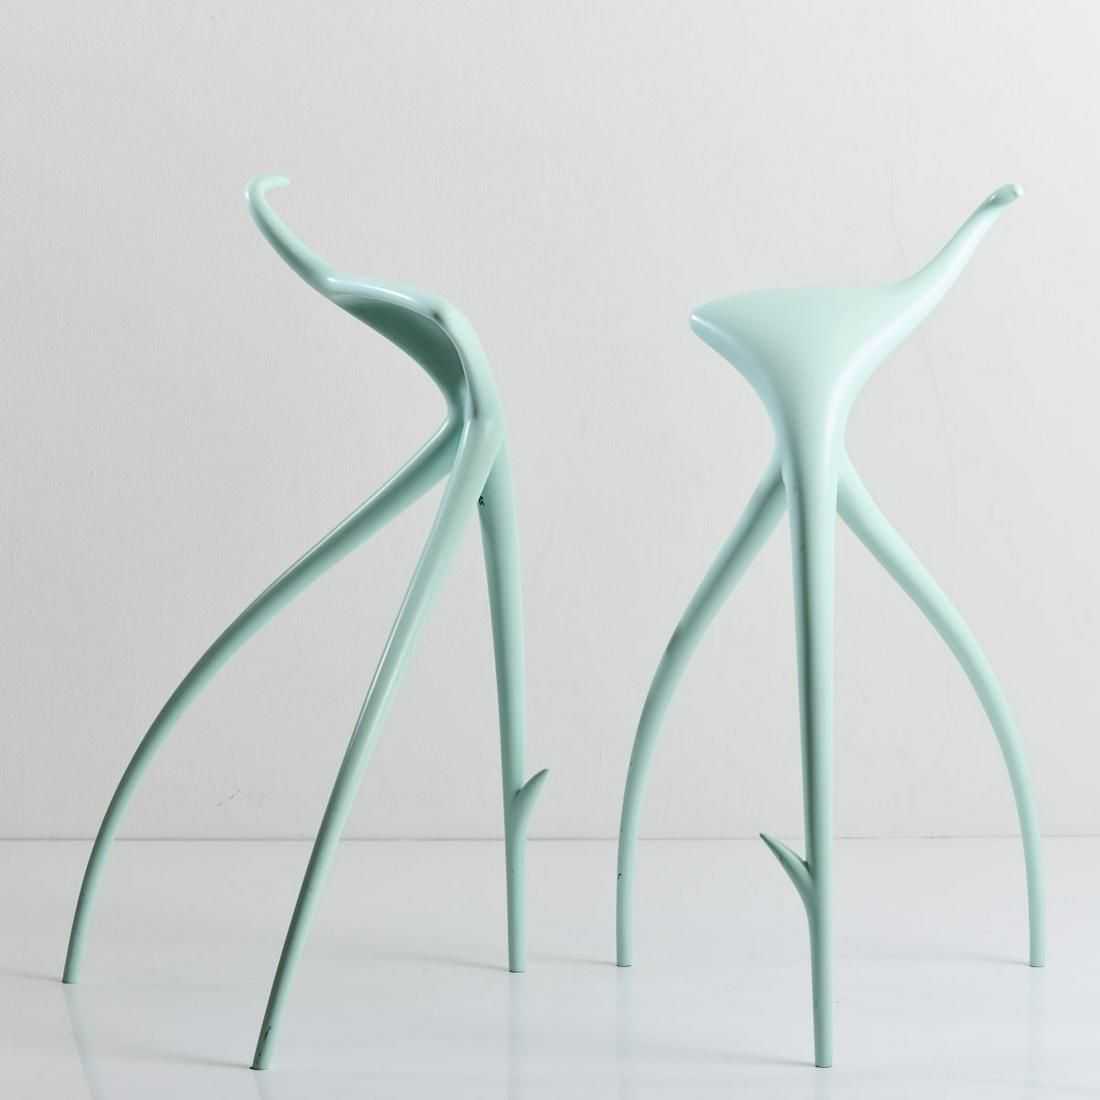 Two of Philippe Starck’s WW Stools, dating to 1990 and named after the German film maker Wim Wenders, who commissioned them, went out at €11,000 ($11,725) plus the buyer’s premium in June 2023. Image courtesy of Quittenbaum Kunstauktionen GmbH and LiveAuctioneers.